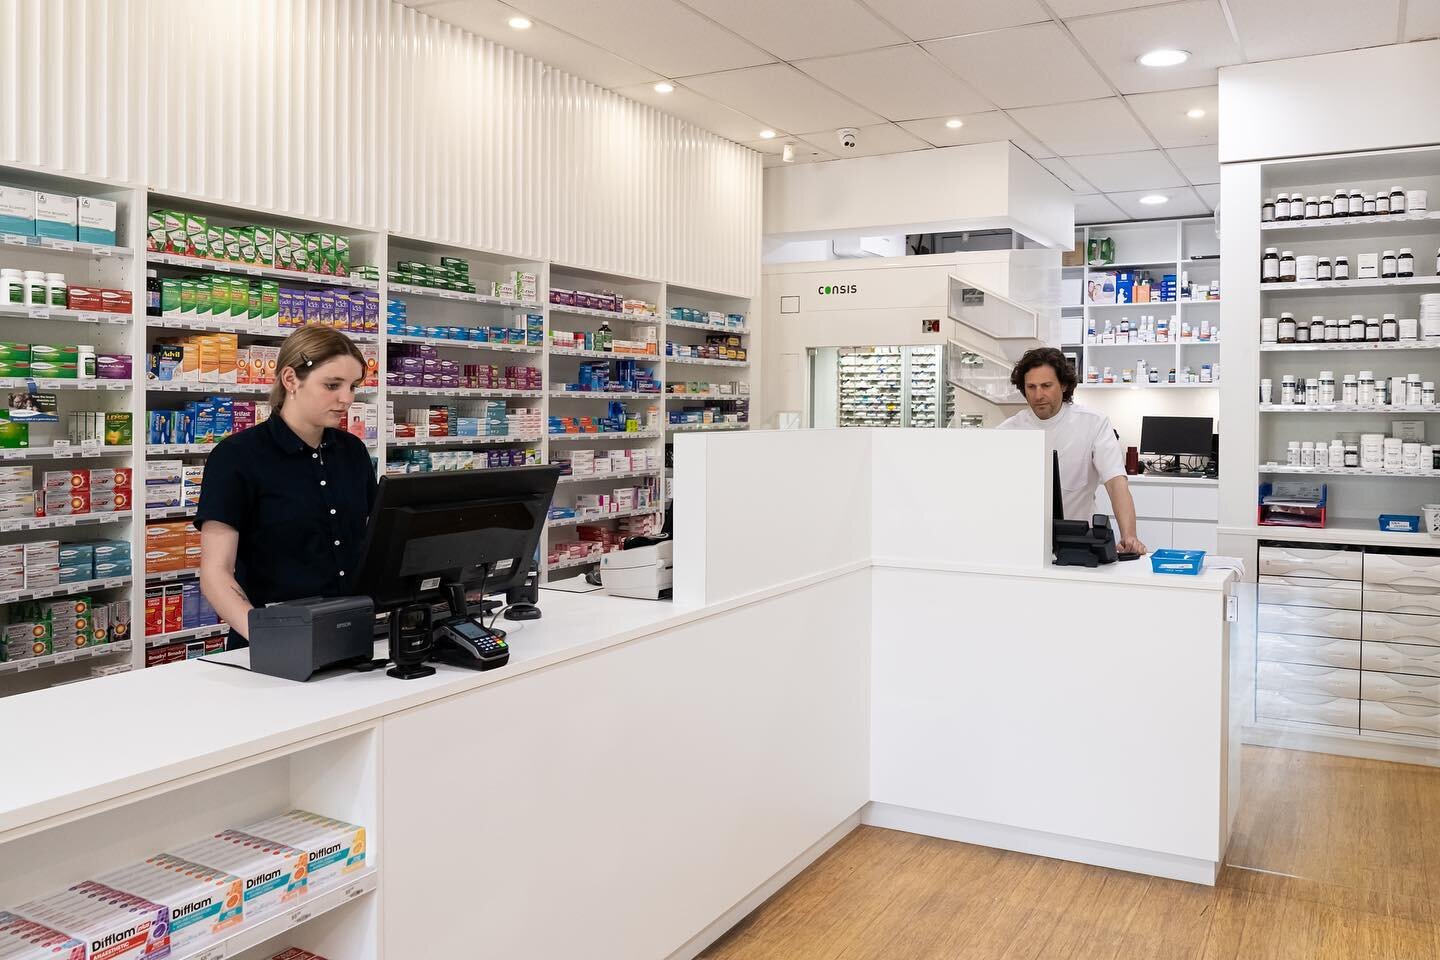 We're excited to announce the completion of our recent pharmacy refit in Mundaring, in collaboration with Draftworx!

Our new space is brighter, more modern, and easier to navigate, making it easier for you to find the products and services you need.